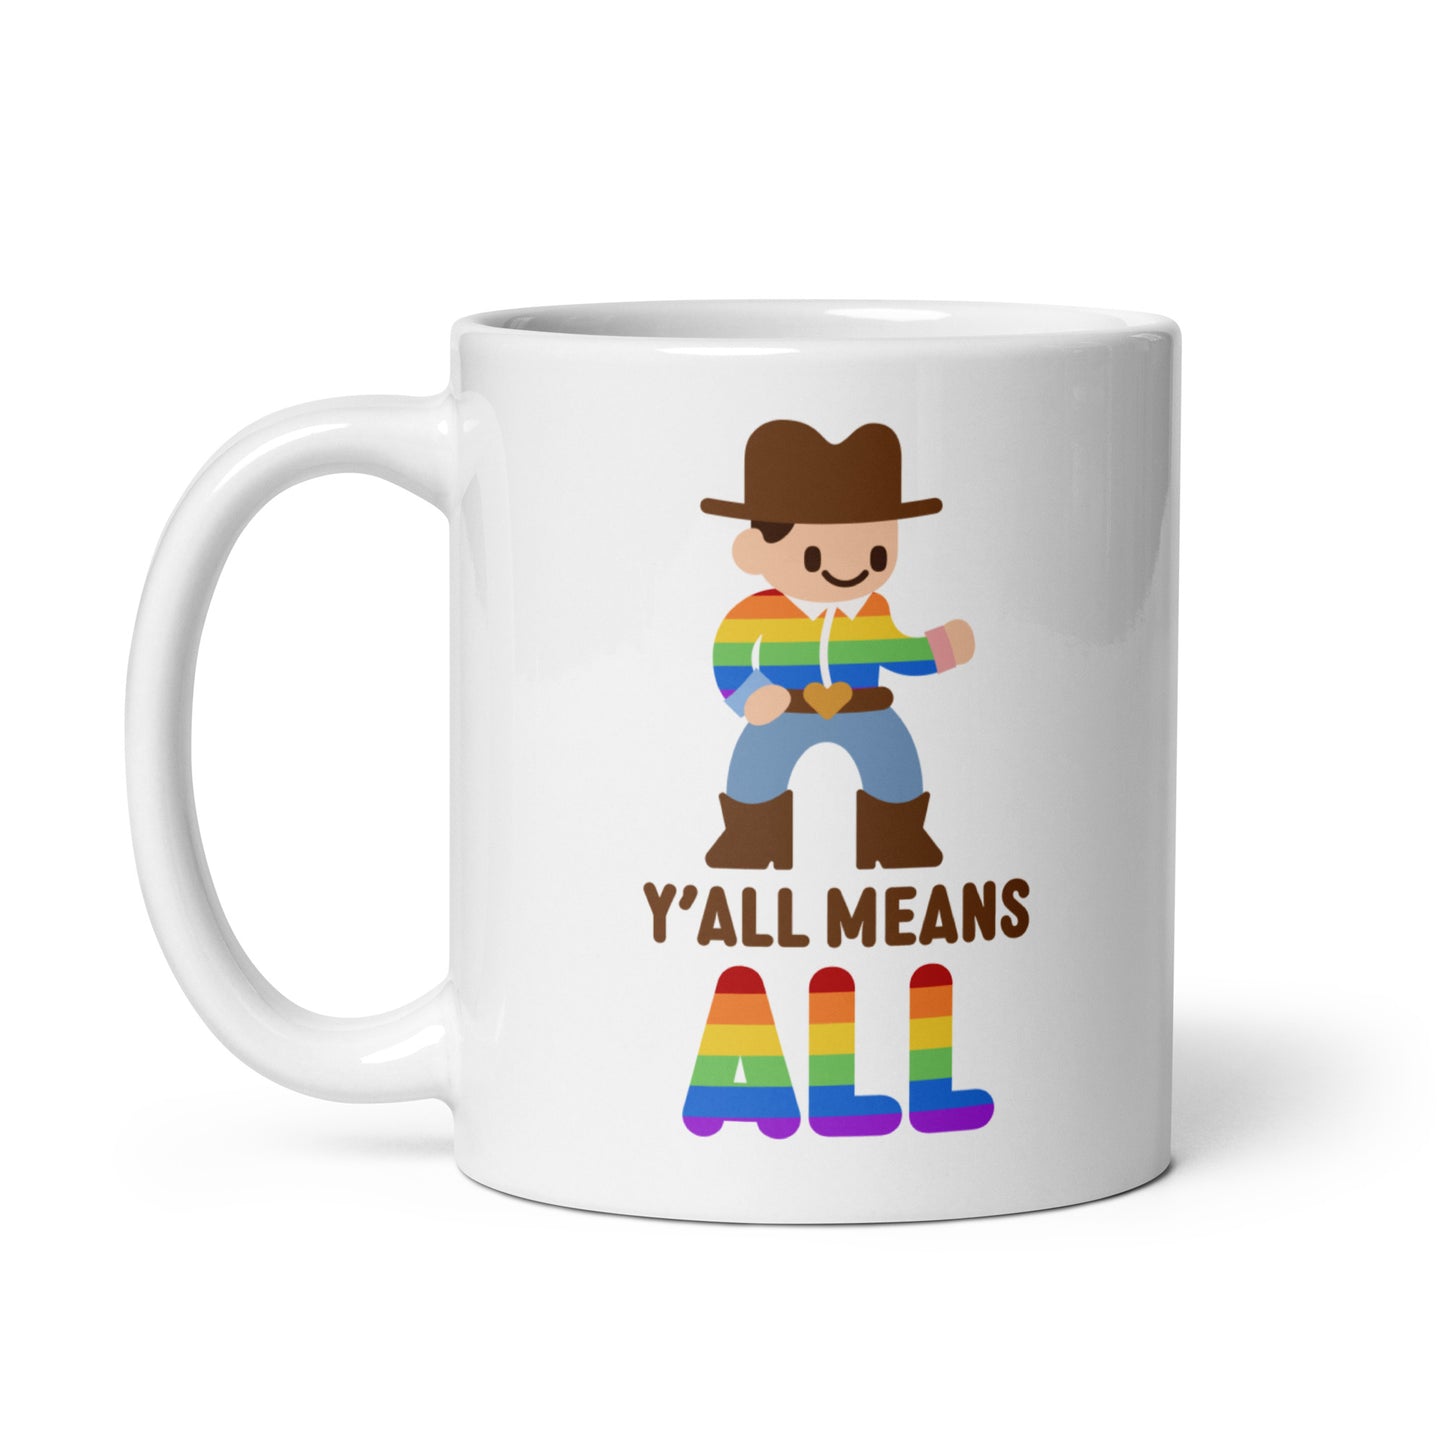 A white 11 ounce coffee mug featuring an illustration of a smiling cowboy wearing a rainbow striped shirt. Text underneath the cowboy reads "Y'all means ALL". The word "ALL" is rainbow-colored to match the cowboy's shirt.